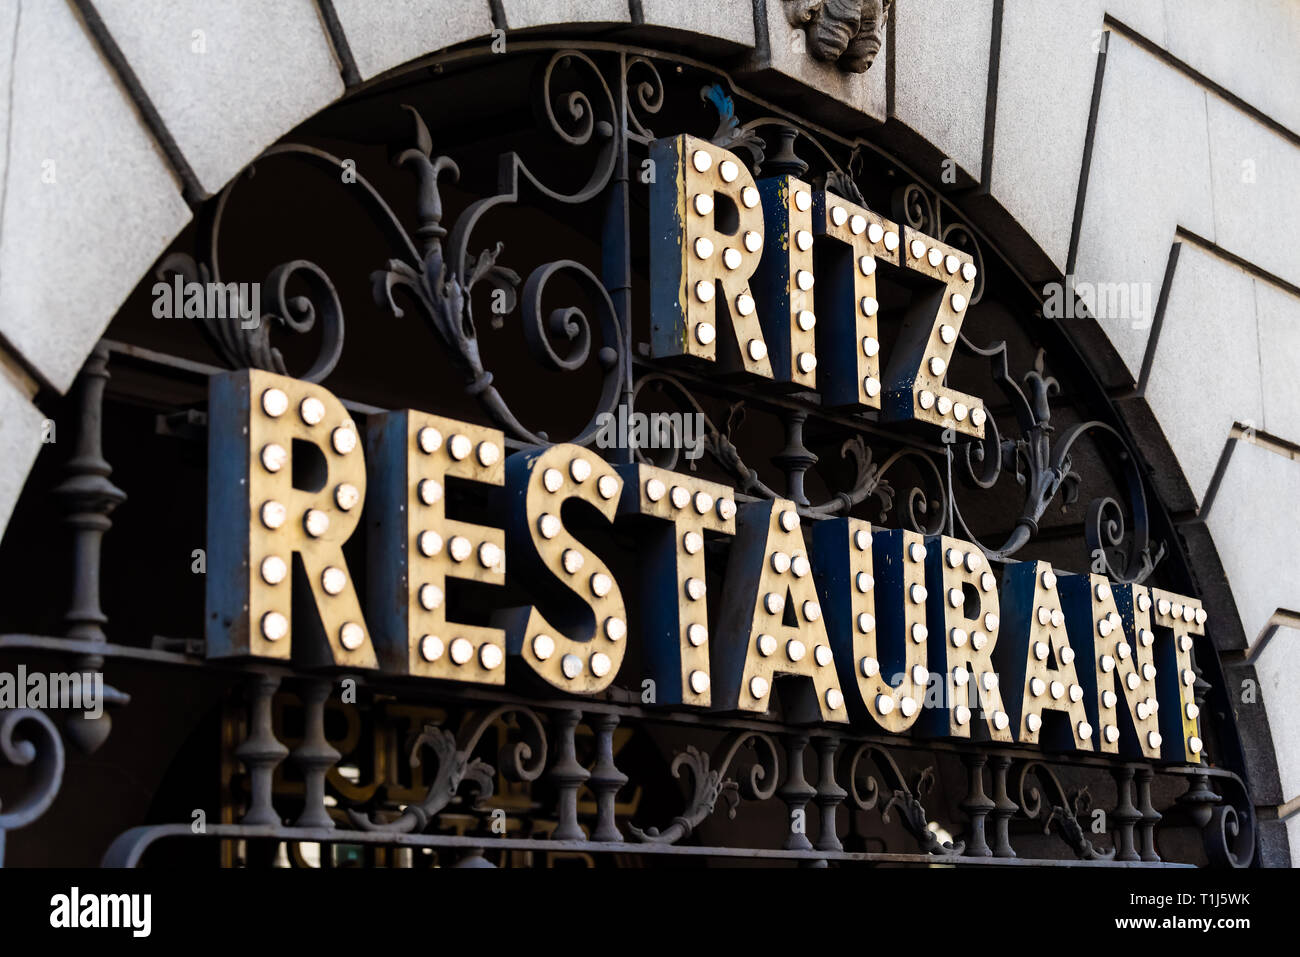 London, UK - June 22, 2018: Piccadilly Circus street with closeup of sign entrance to the Ritz hotel restaurant text Stock Photo